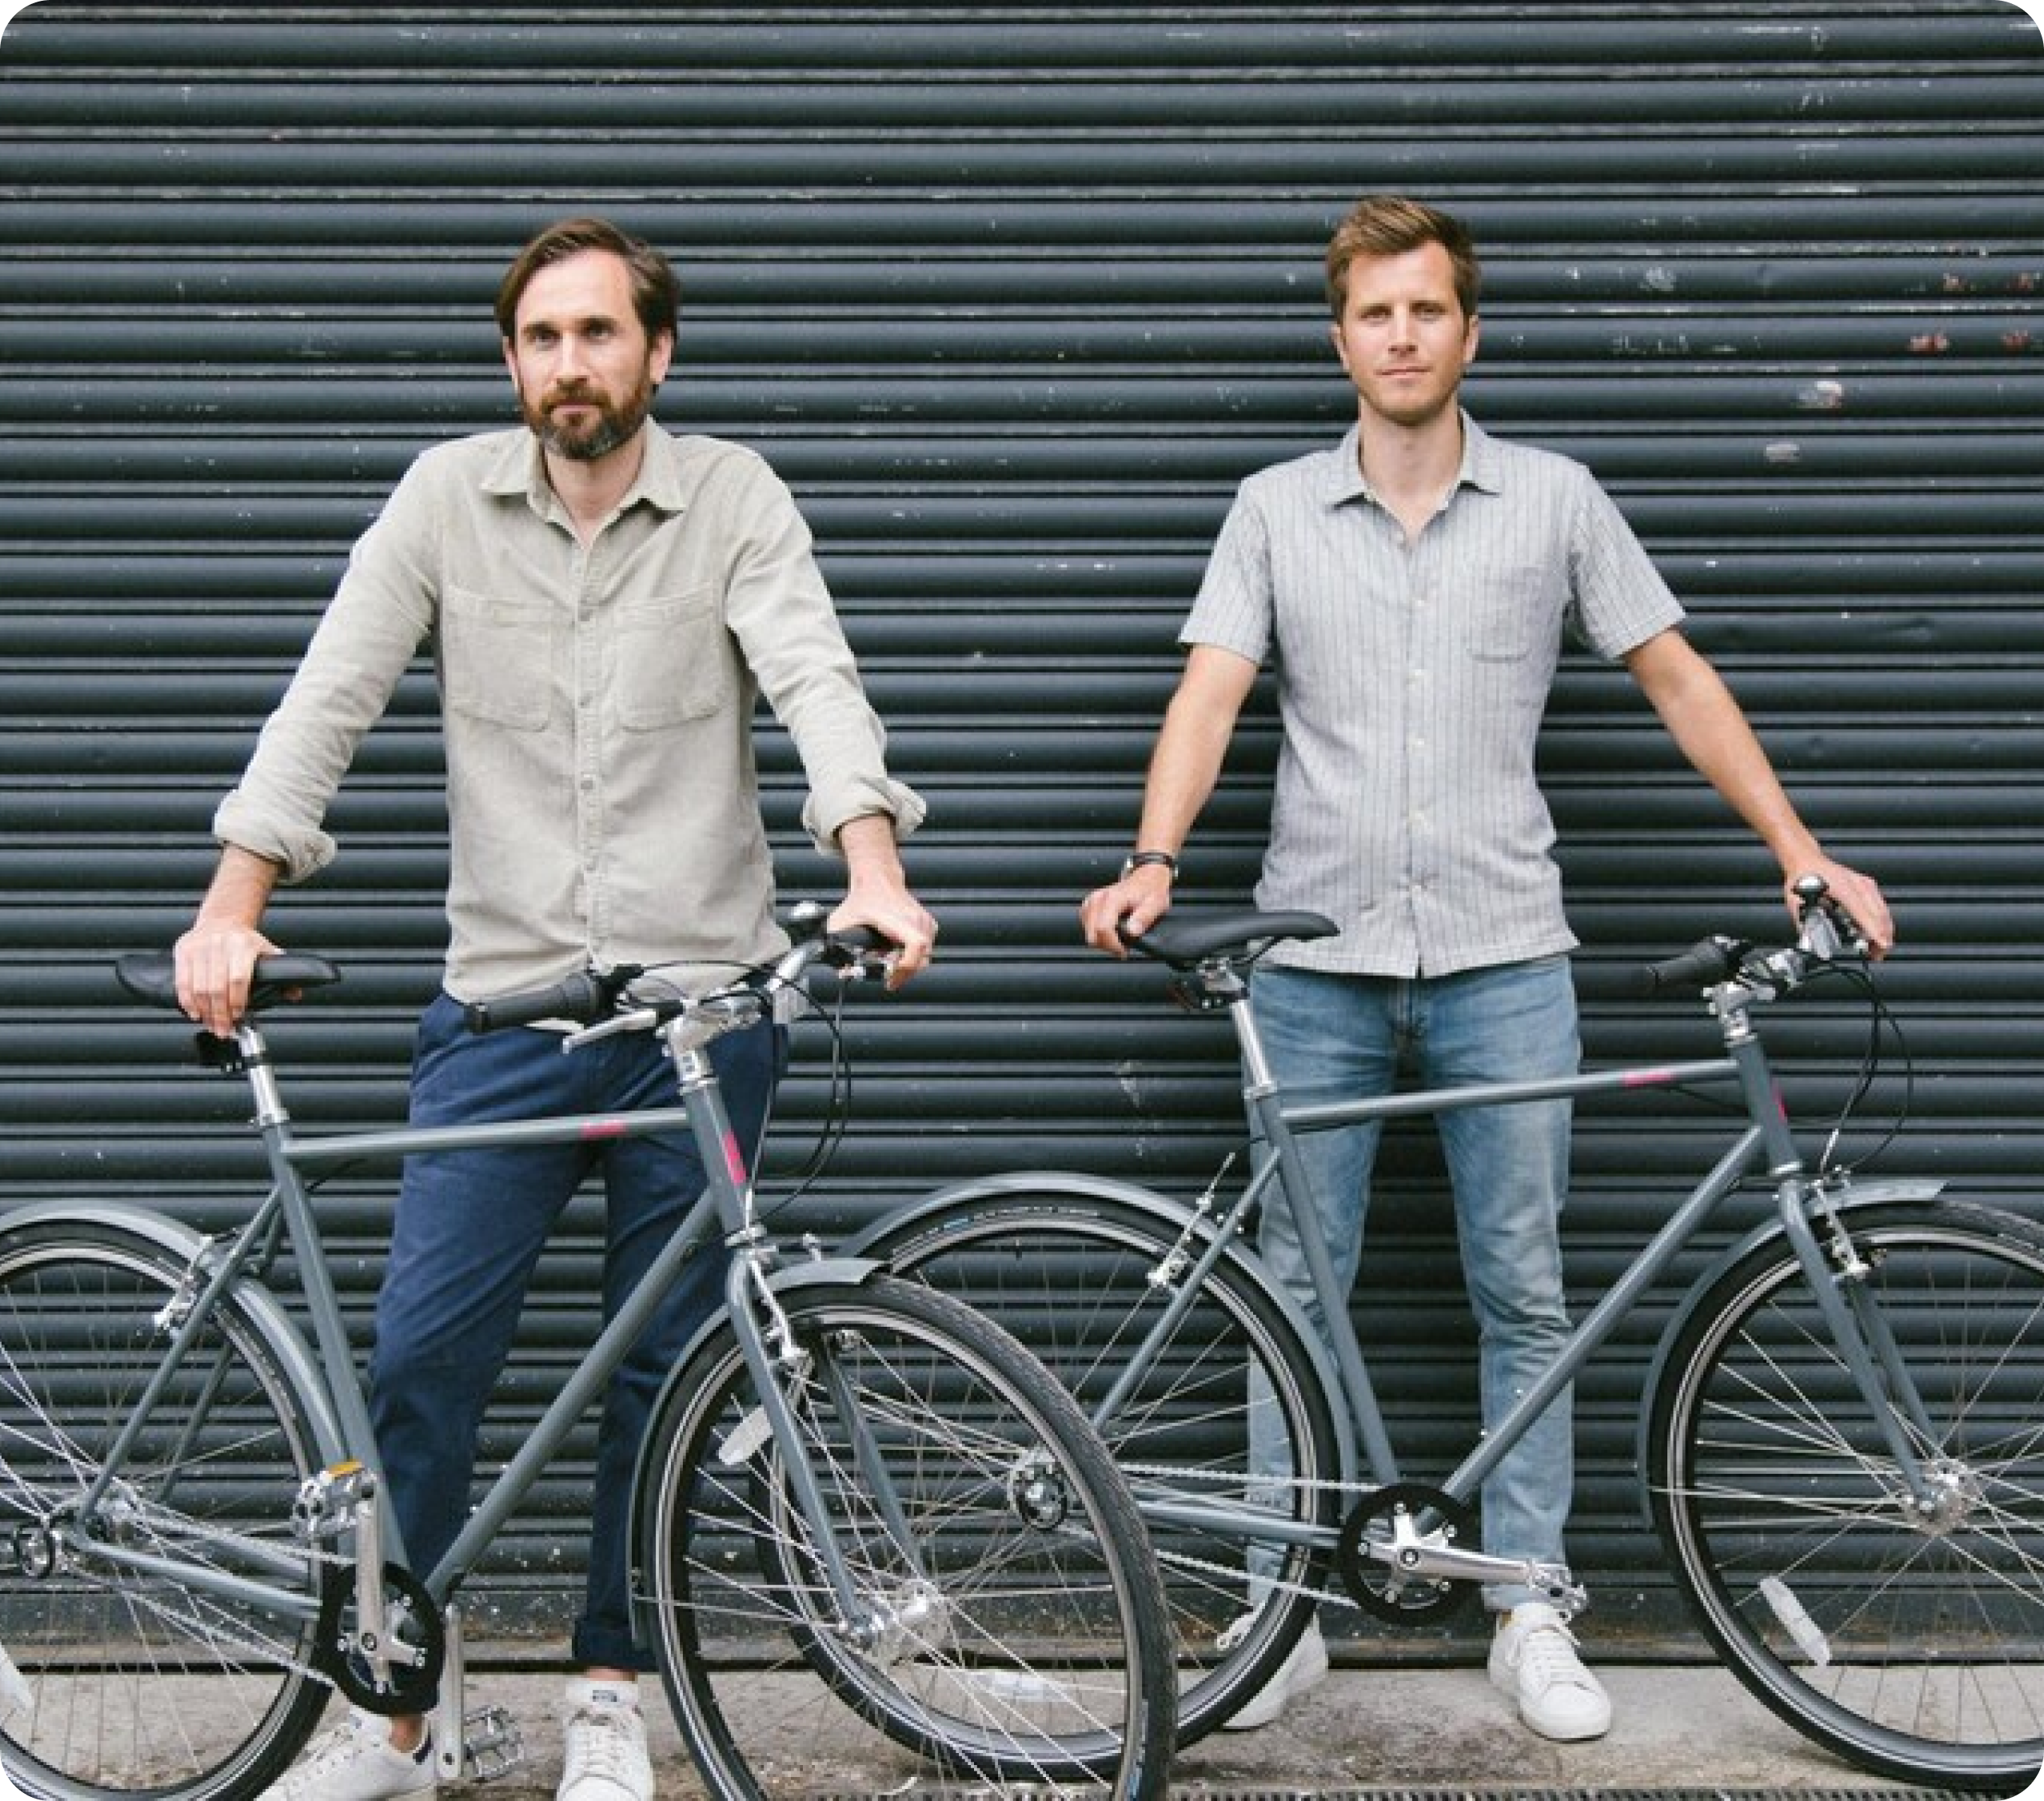 About Buzzbike - Tom and Andy with Buzzbike